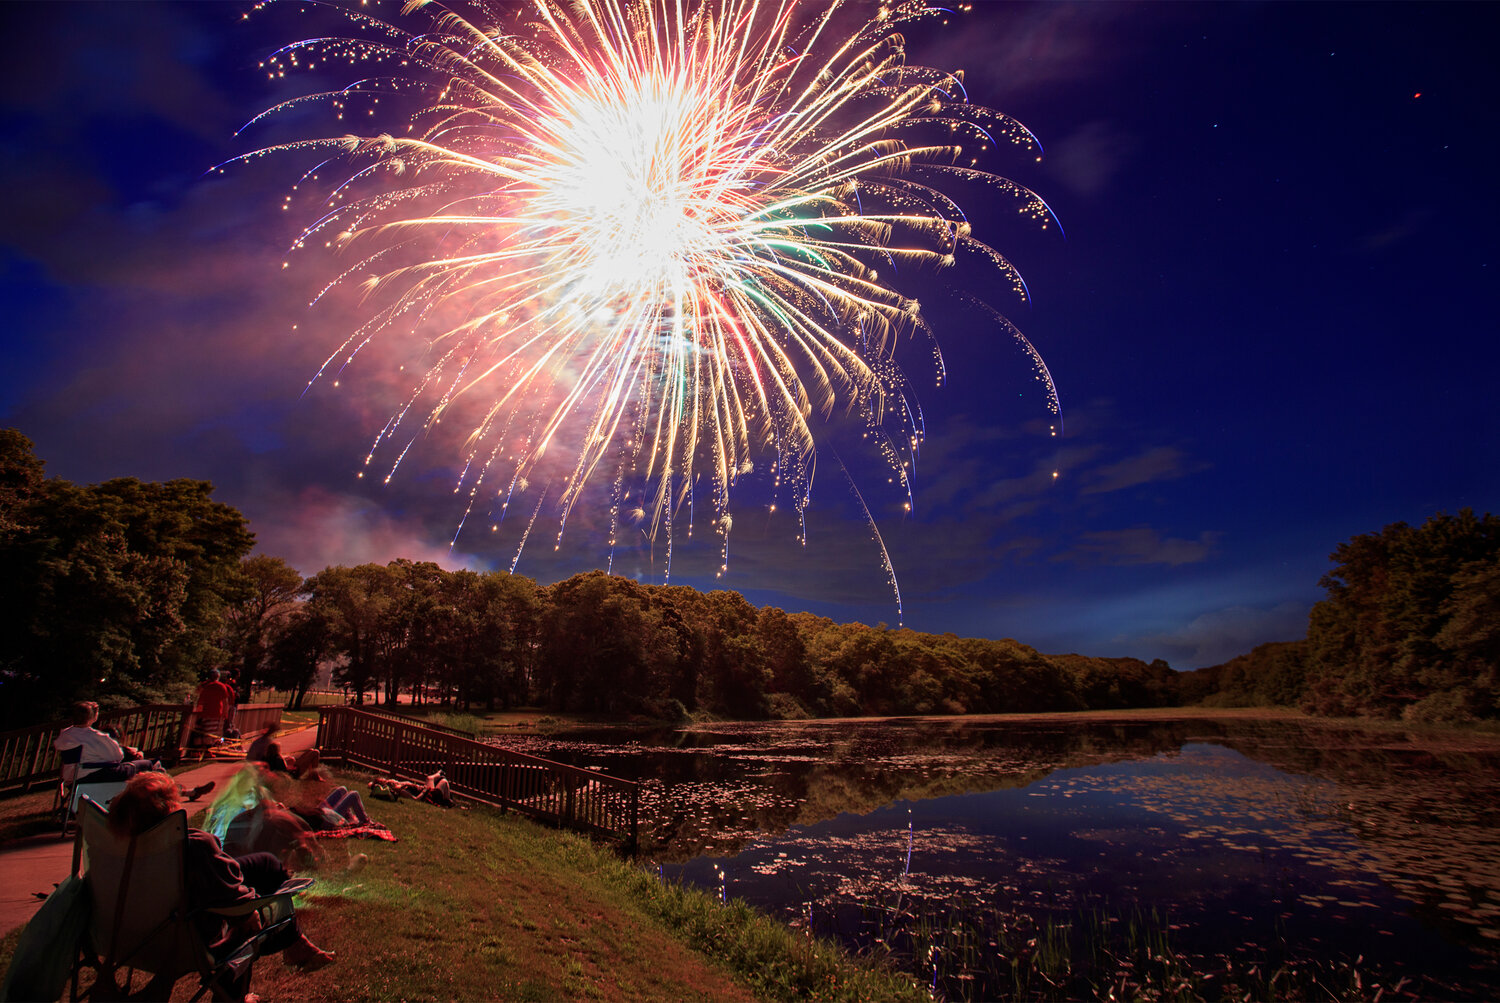 South Kingstown’s fireworks display from Indian Run Reservoir